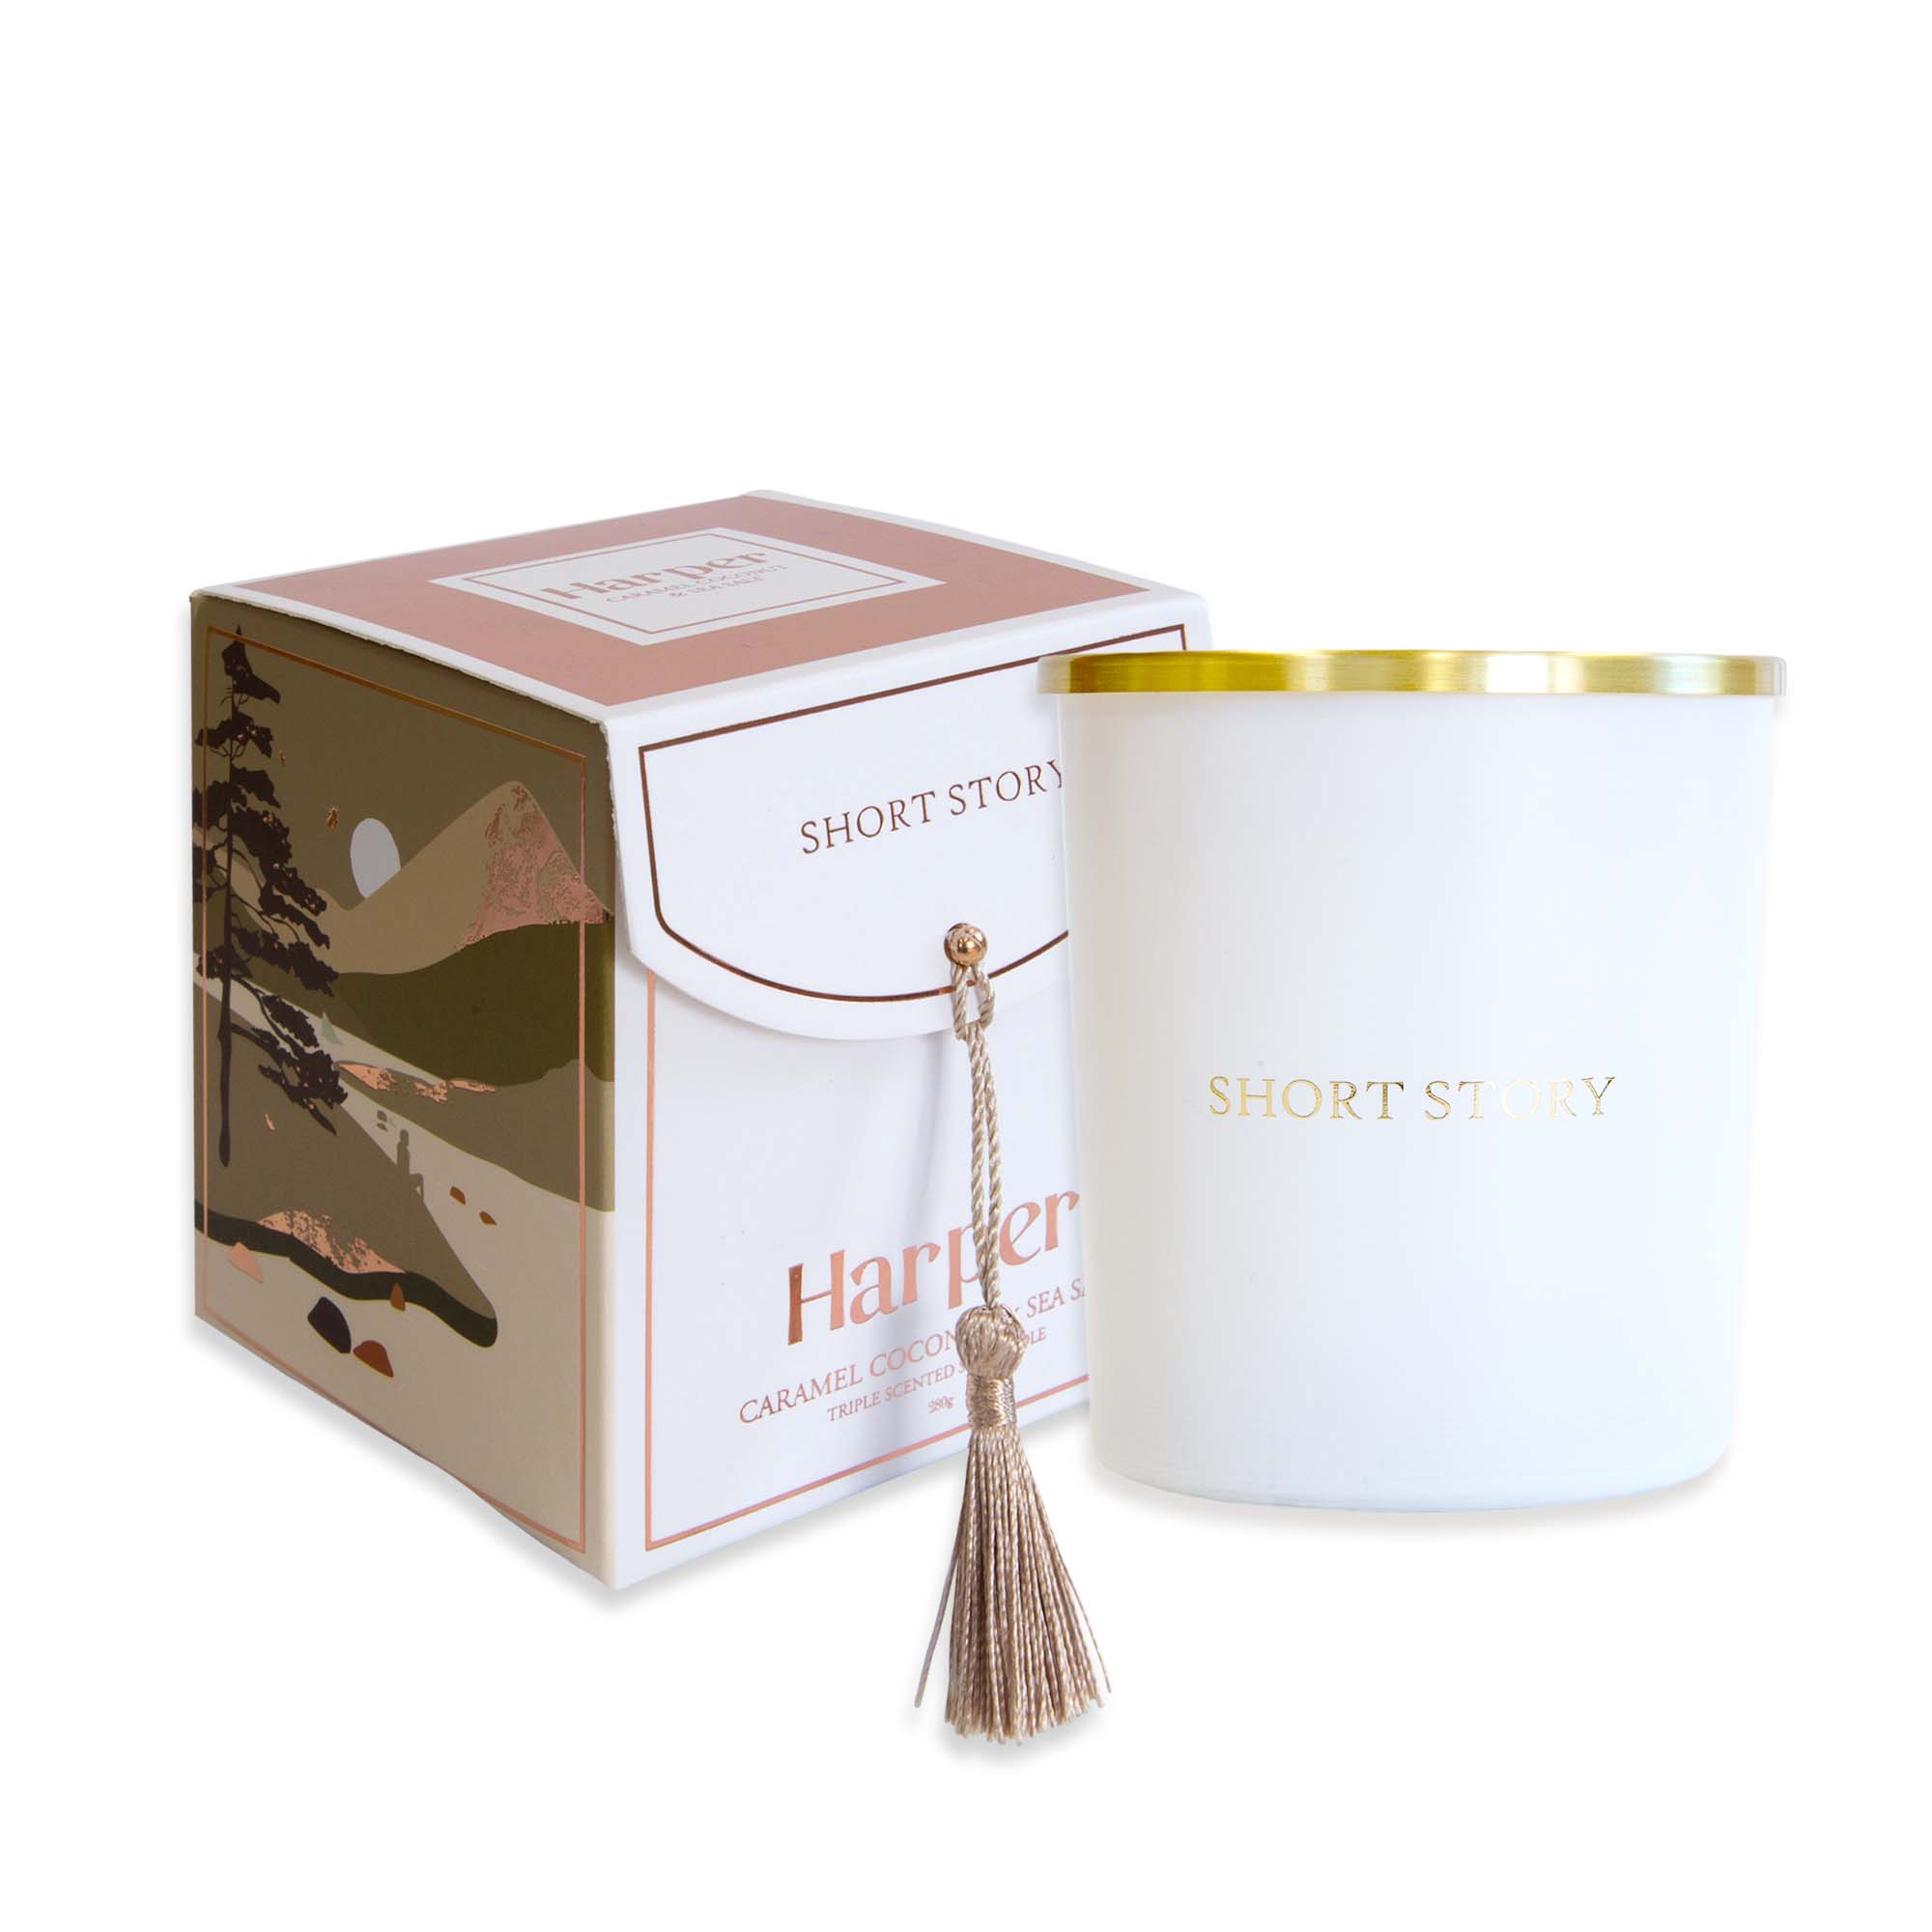 Candle and Diffuser Pack Harper